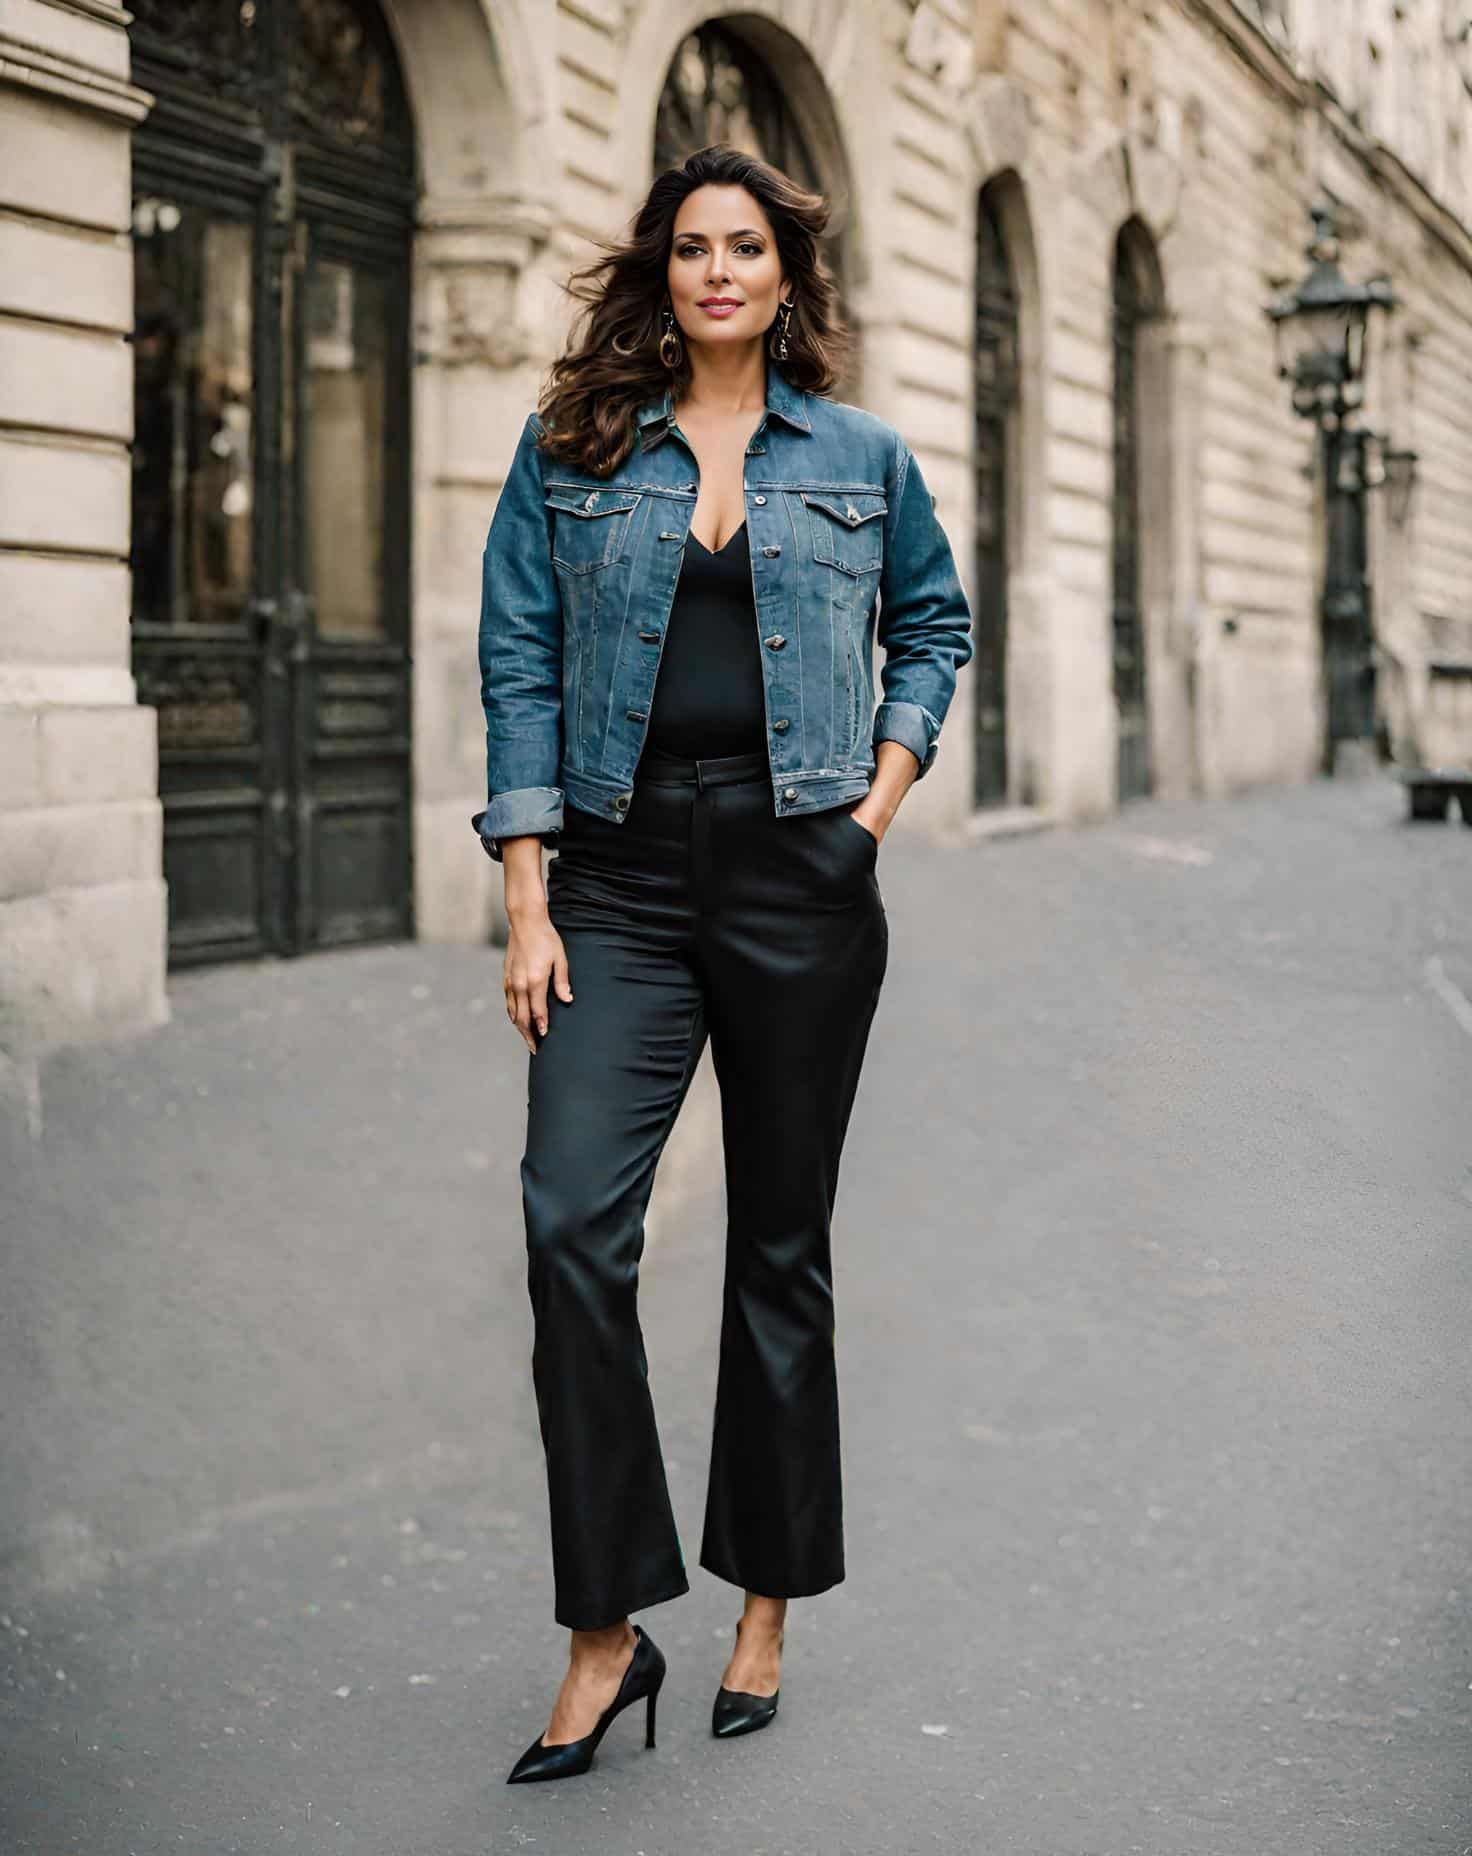 <p>Denim jacket is a casual wardrobe staple that everyone loves, but did you know that you can style it in so many different ways to take you from desk to dinner? Here are the 25 ways you can wear your denim jacket from desk to dinner and always look chic!</p>